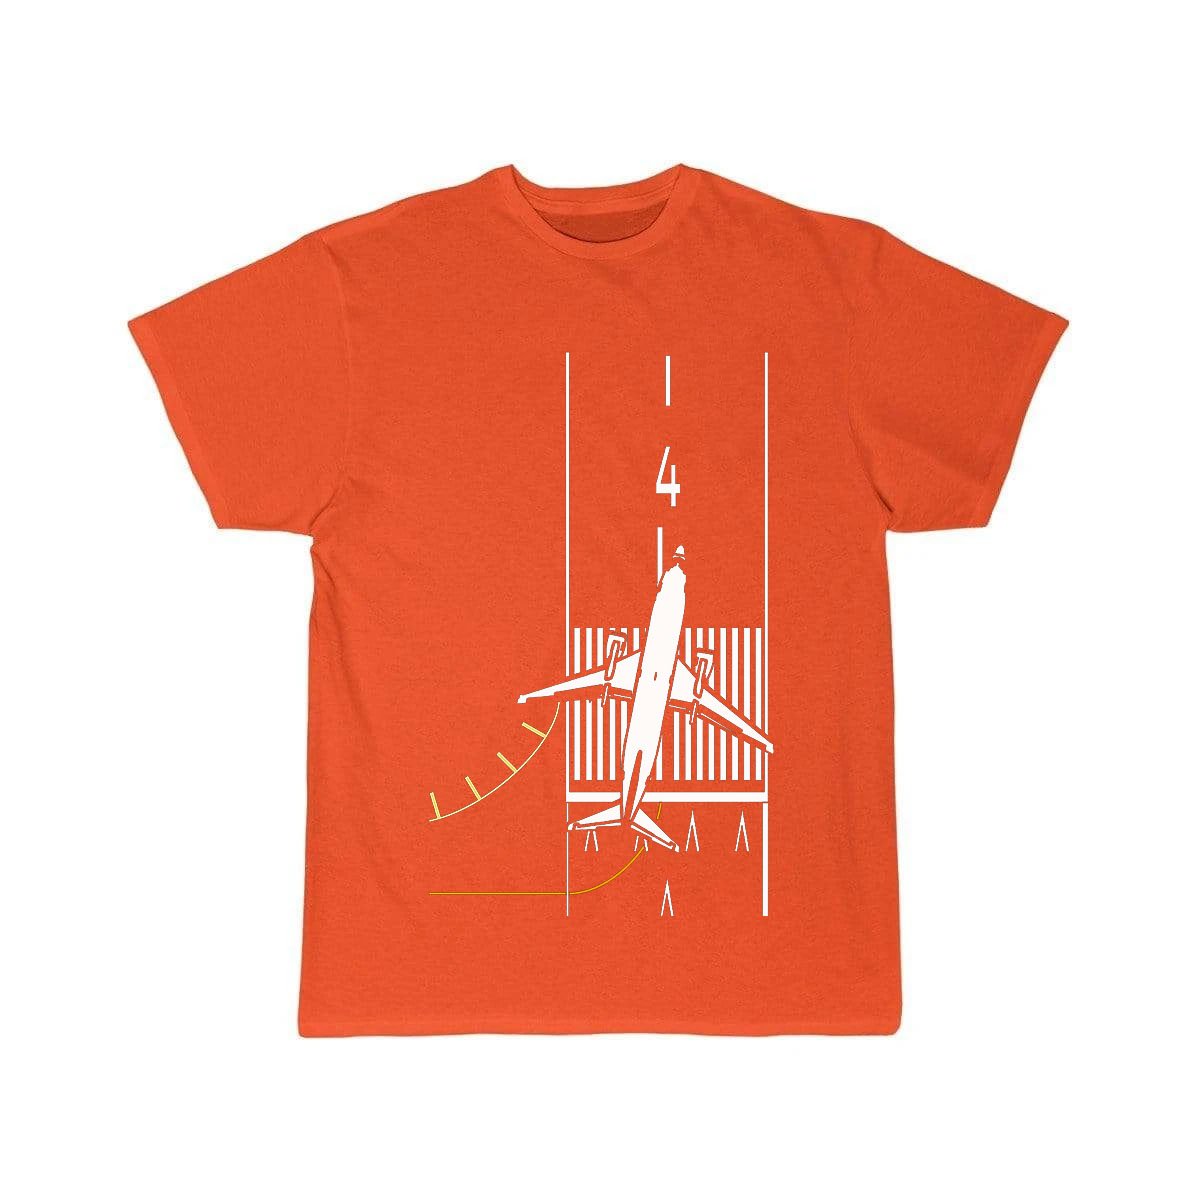 CLEARED FOR TAKEOFF, RUNWAY 4 LEFT GRAPHIC T-SHIRT THE AV8R